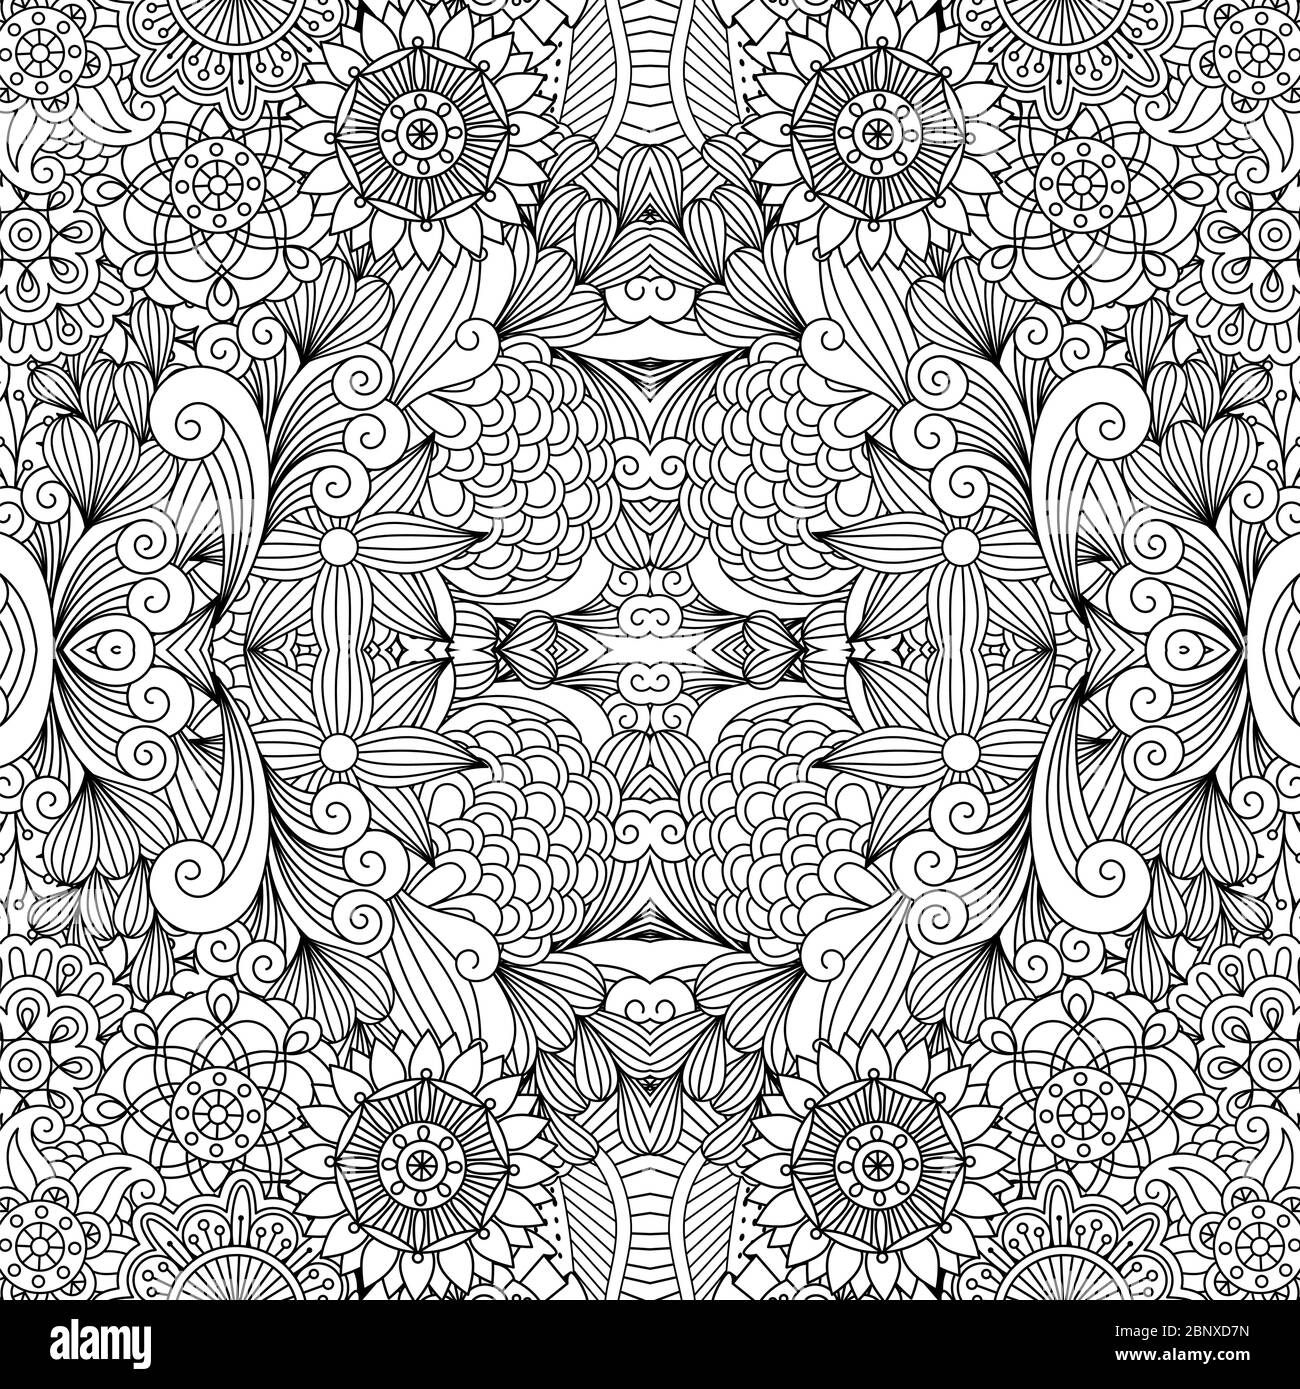 Flowers and swirls line decorative pattern in black and white. Vector illustration Stock Vector